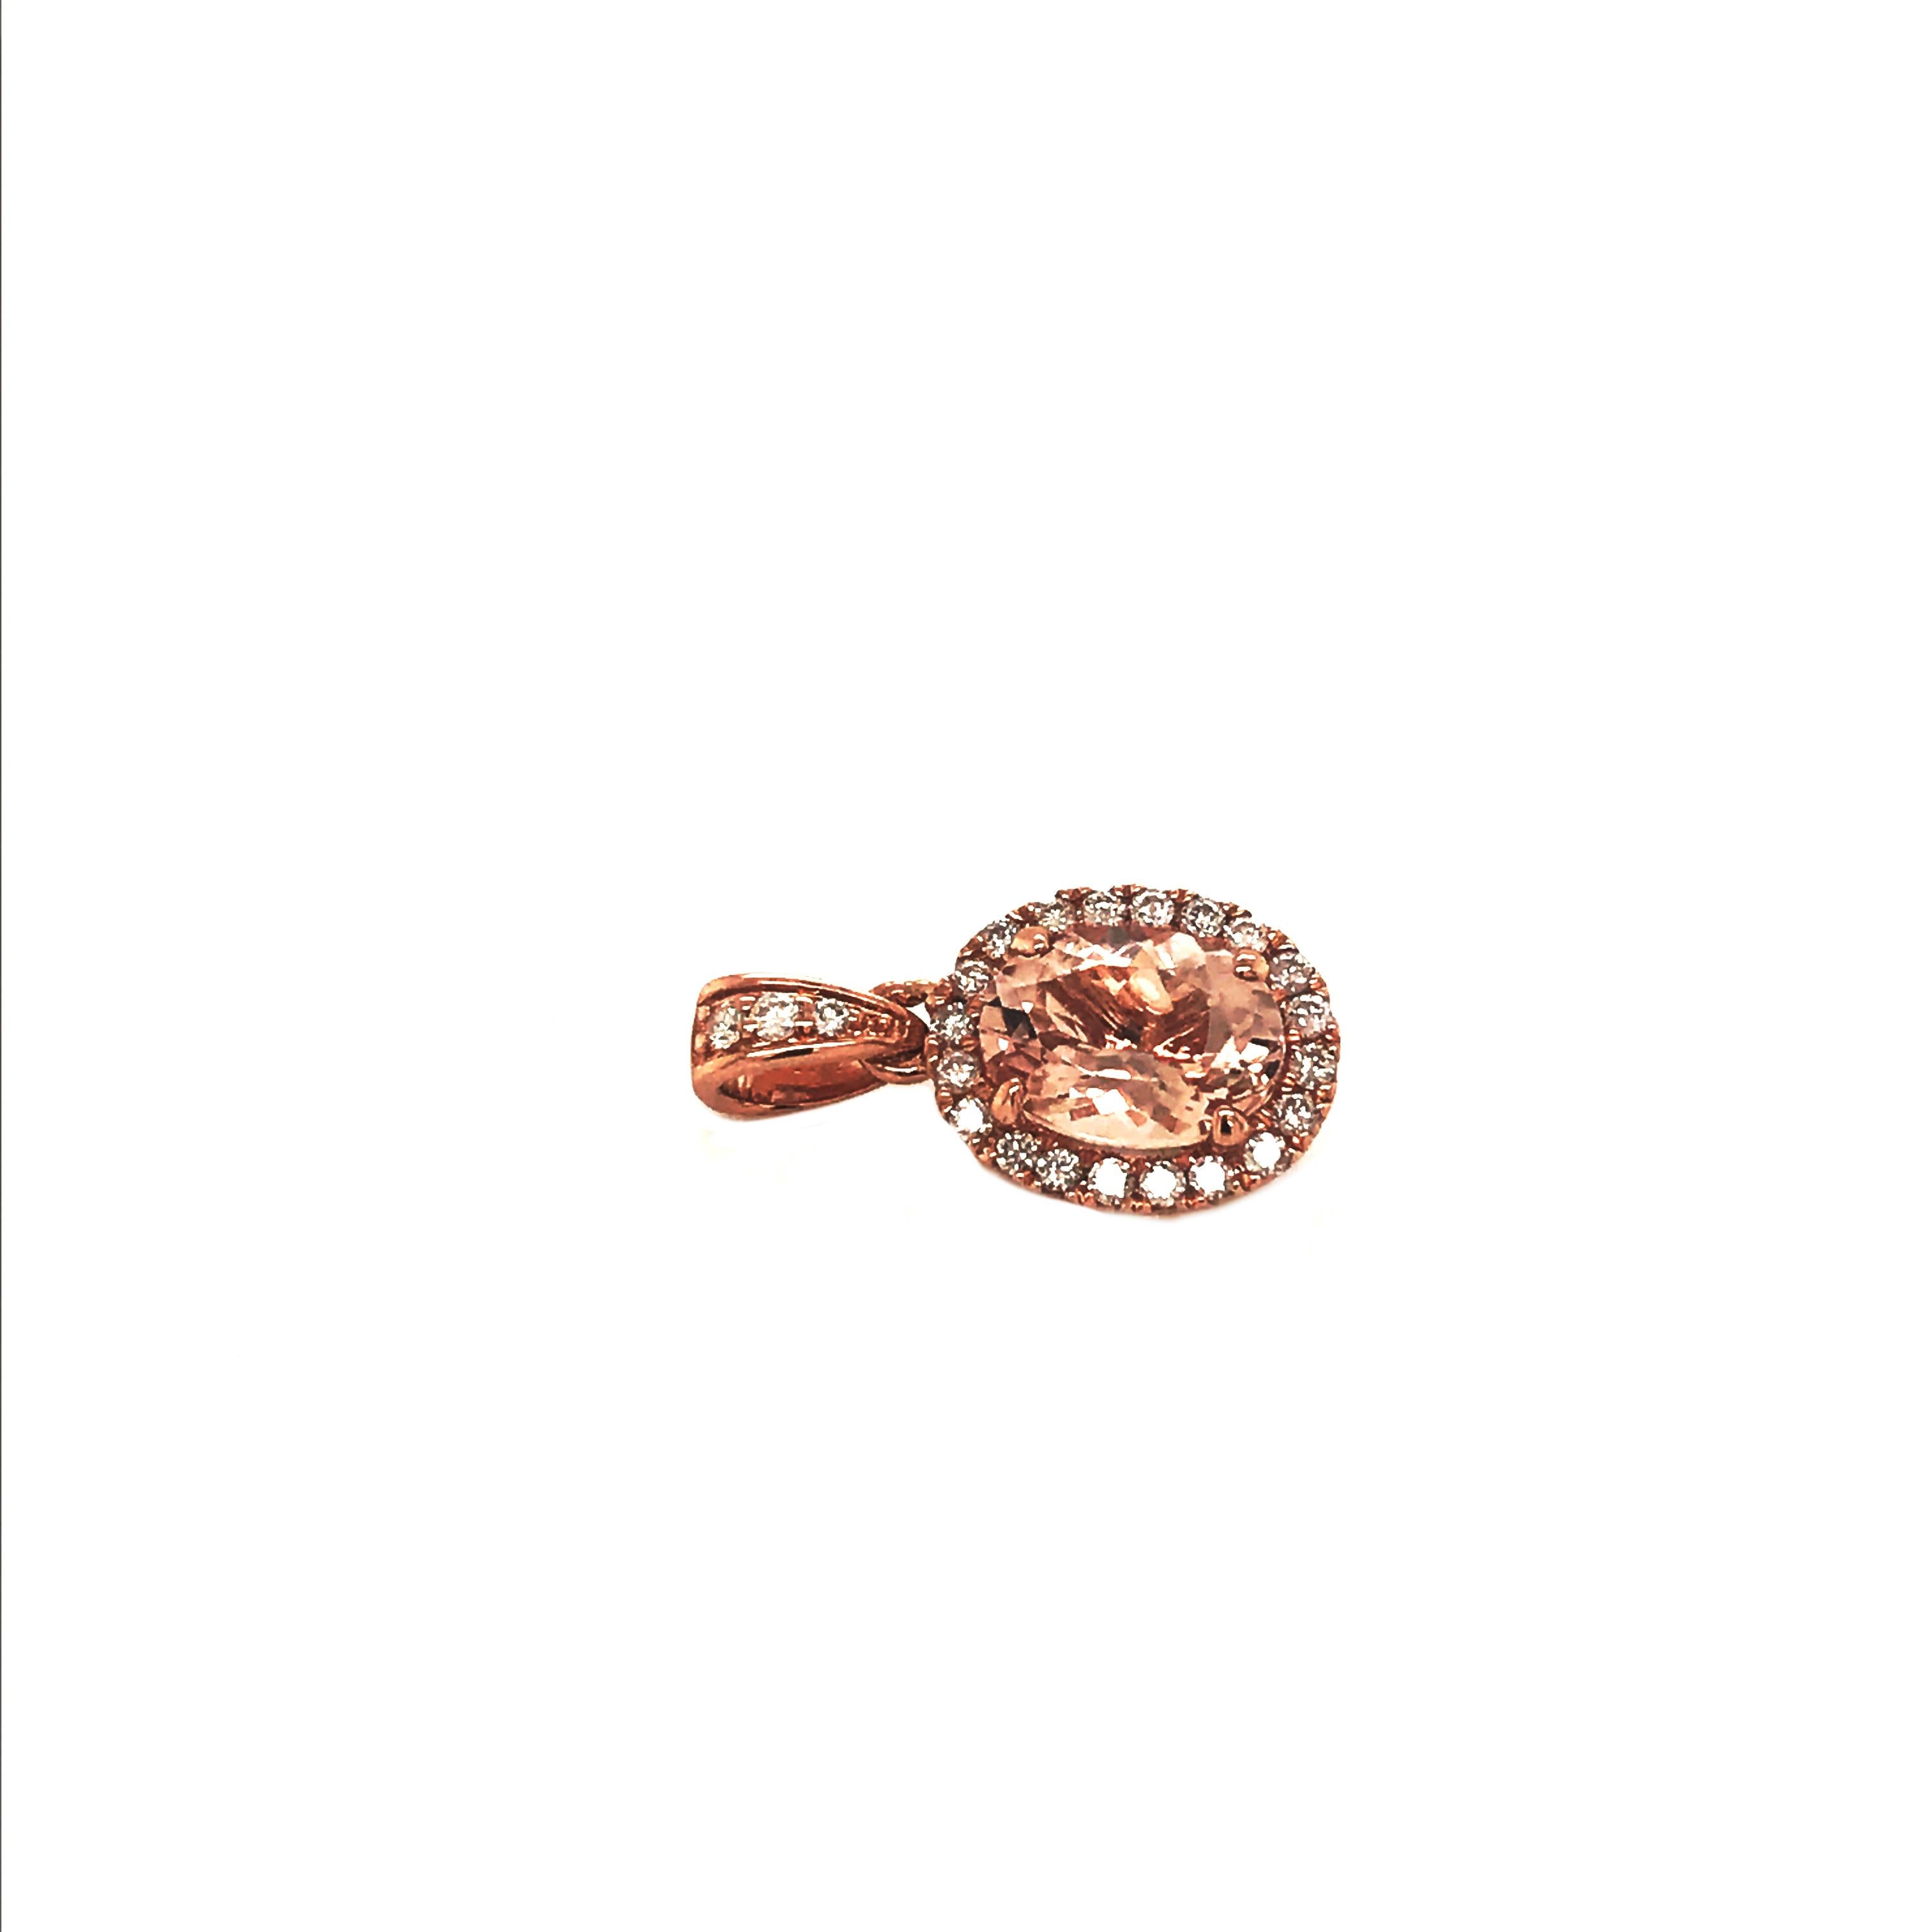 This is a gorgeous natural morganite and diamond pendant set in solid 14K rose gold. The fancy 8x6MM oval morganite has an excellent peachy pink color and is surrounded by a halo of round-cut white diamonds. The ring is stamped 14K and is a true